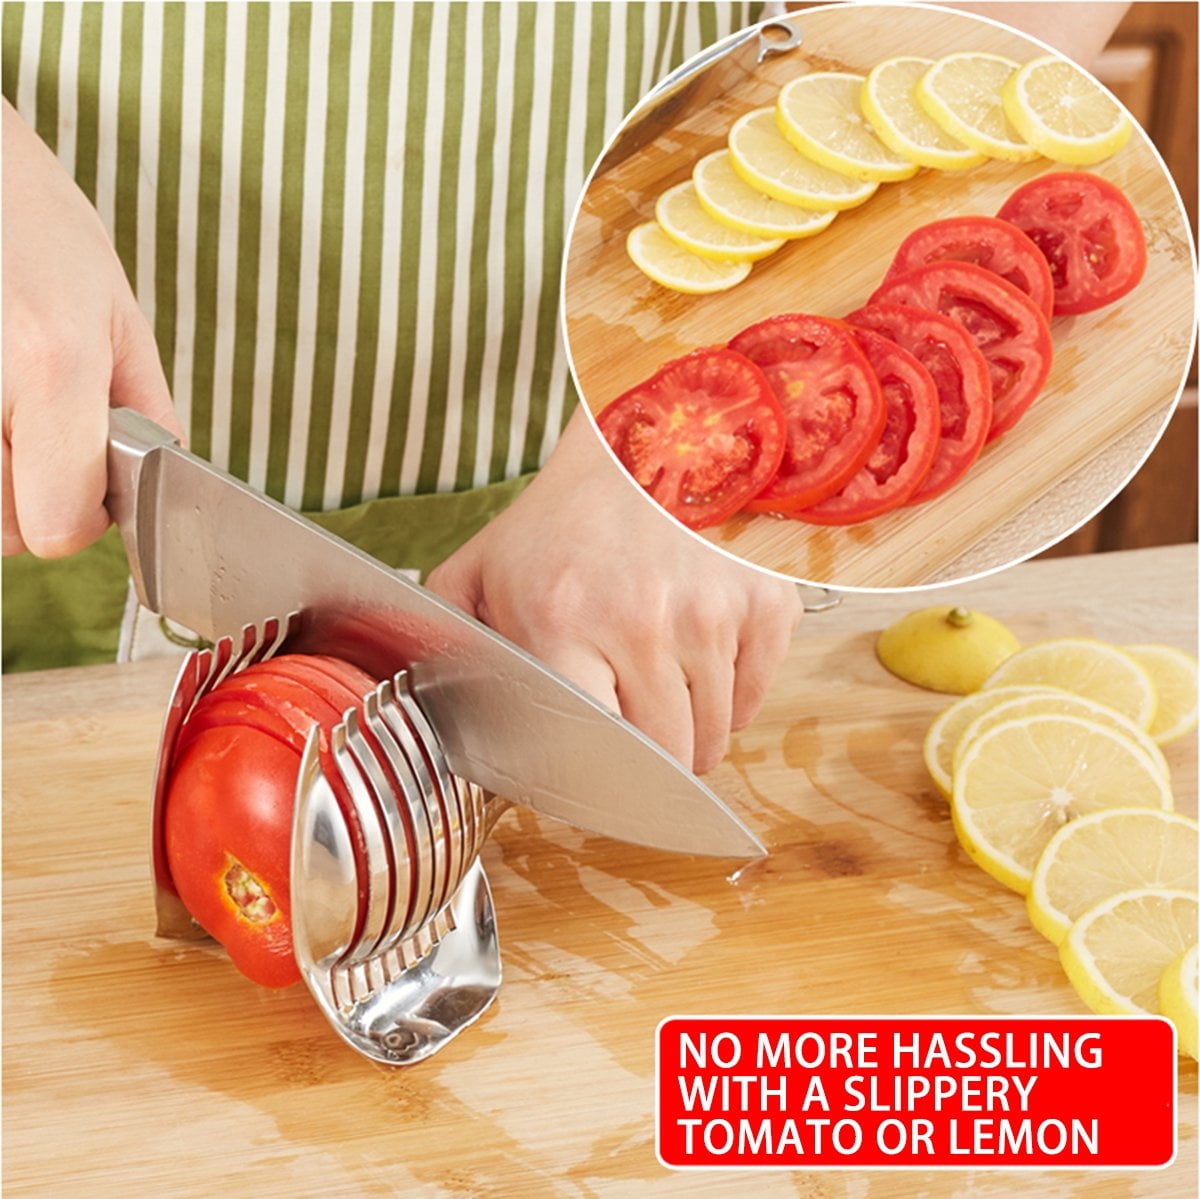 Xunda Tomato Slicer Lemon Cutter Stainless Steel Kitchen Cutting Aid Holder Tools for Soft Skin Fruits and Vegetables,Home Made Food & Drinks Deco